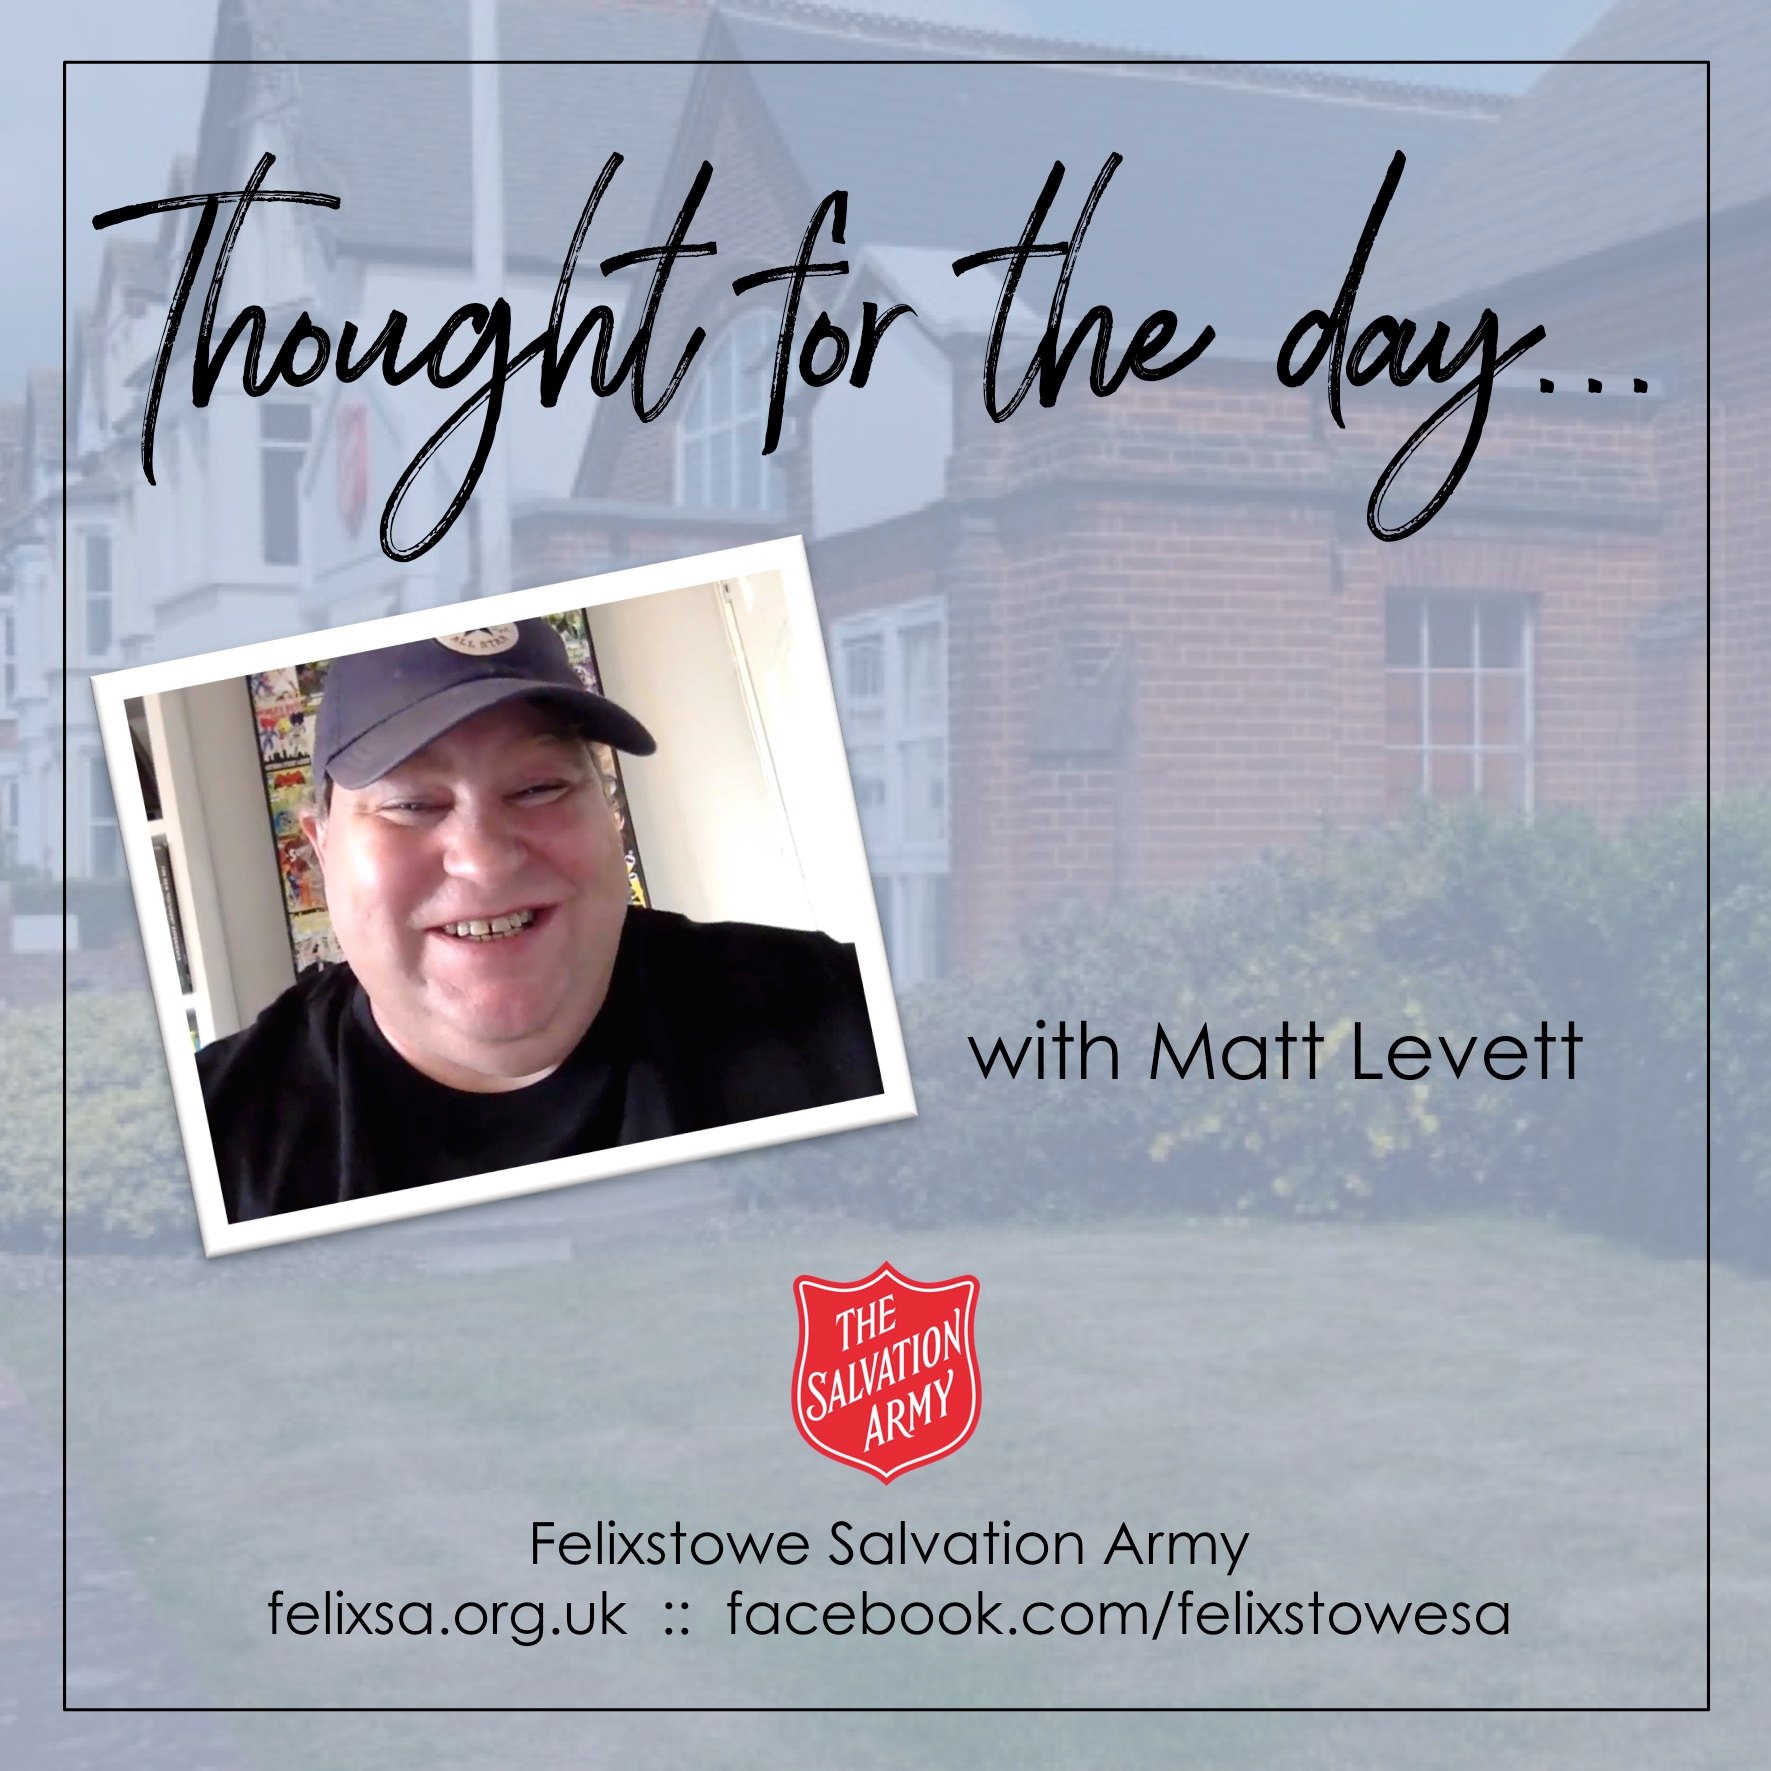 Thought for the Day with Matt Levett